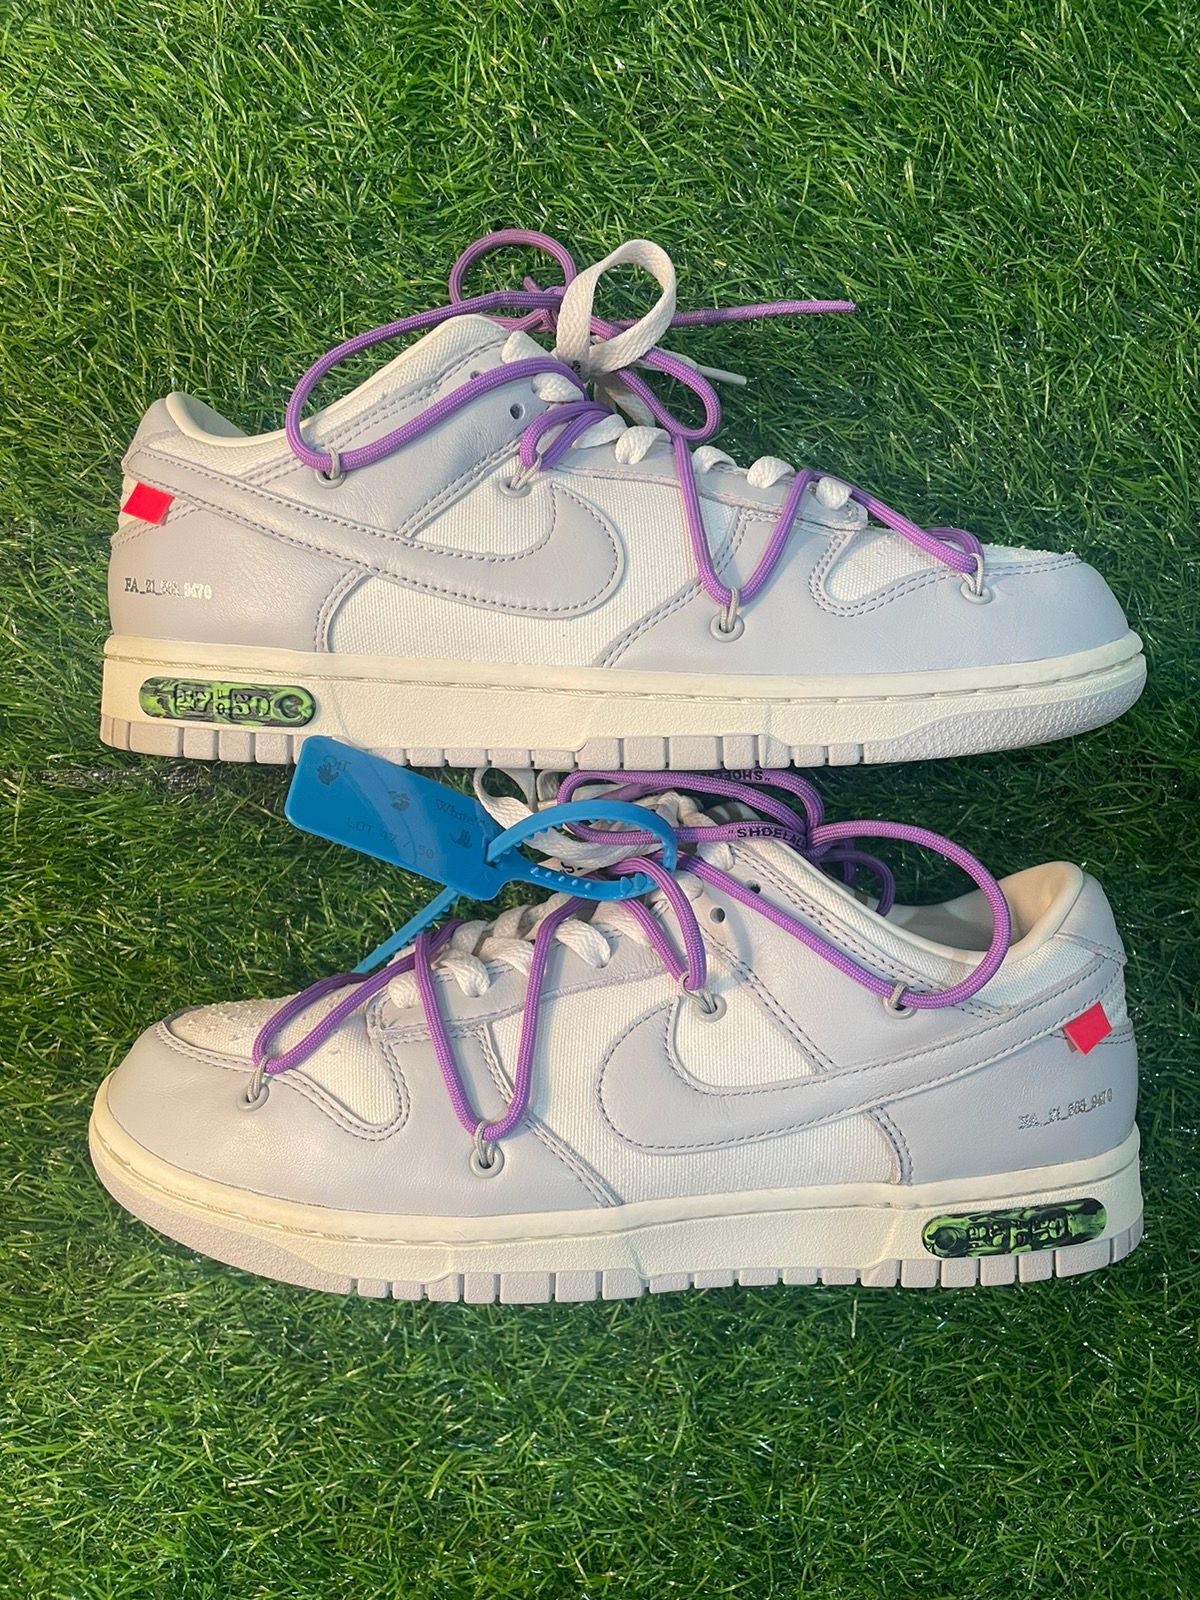 Pre-owned Nike Off White Dunk Lot 47 Of 50 Shoes In Purple